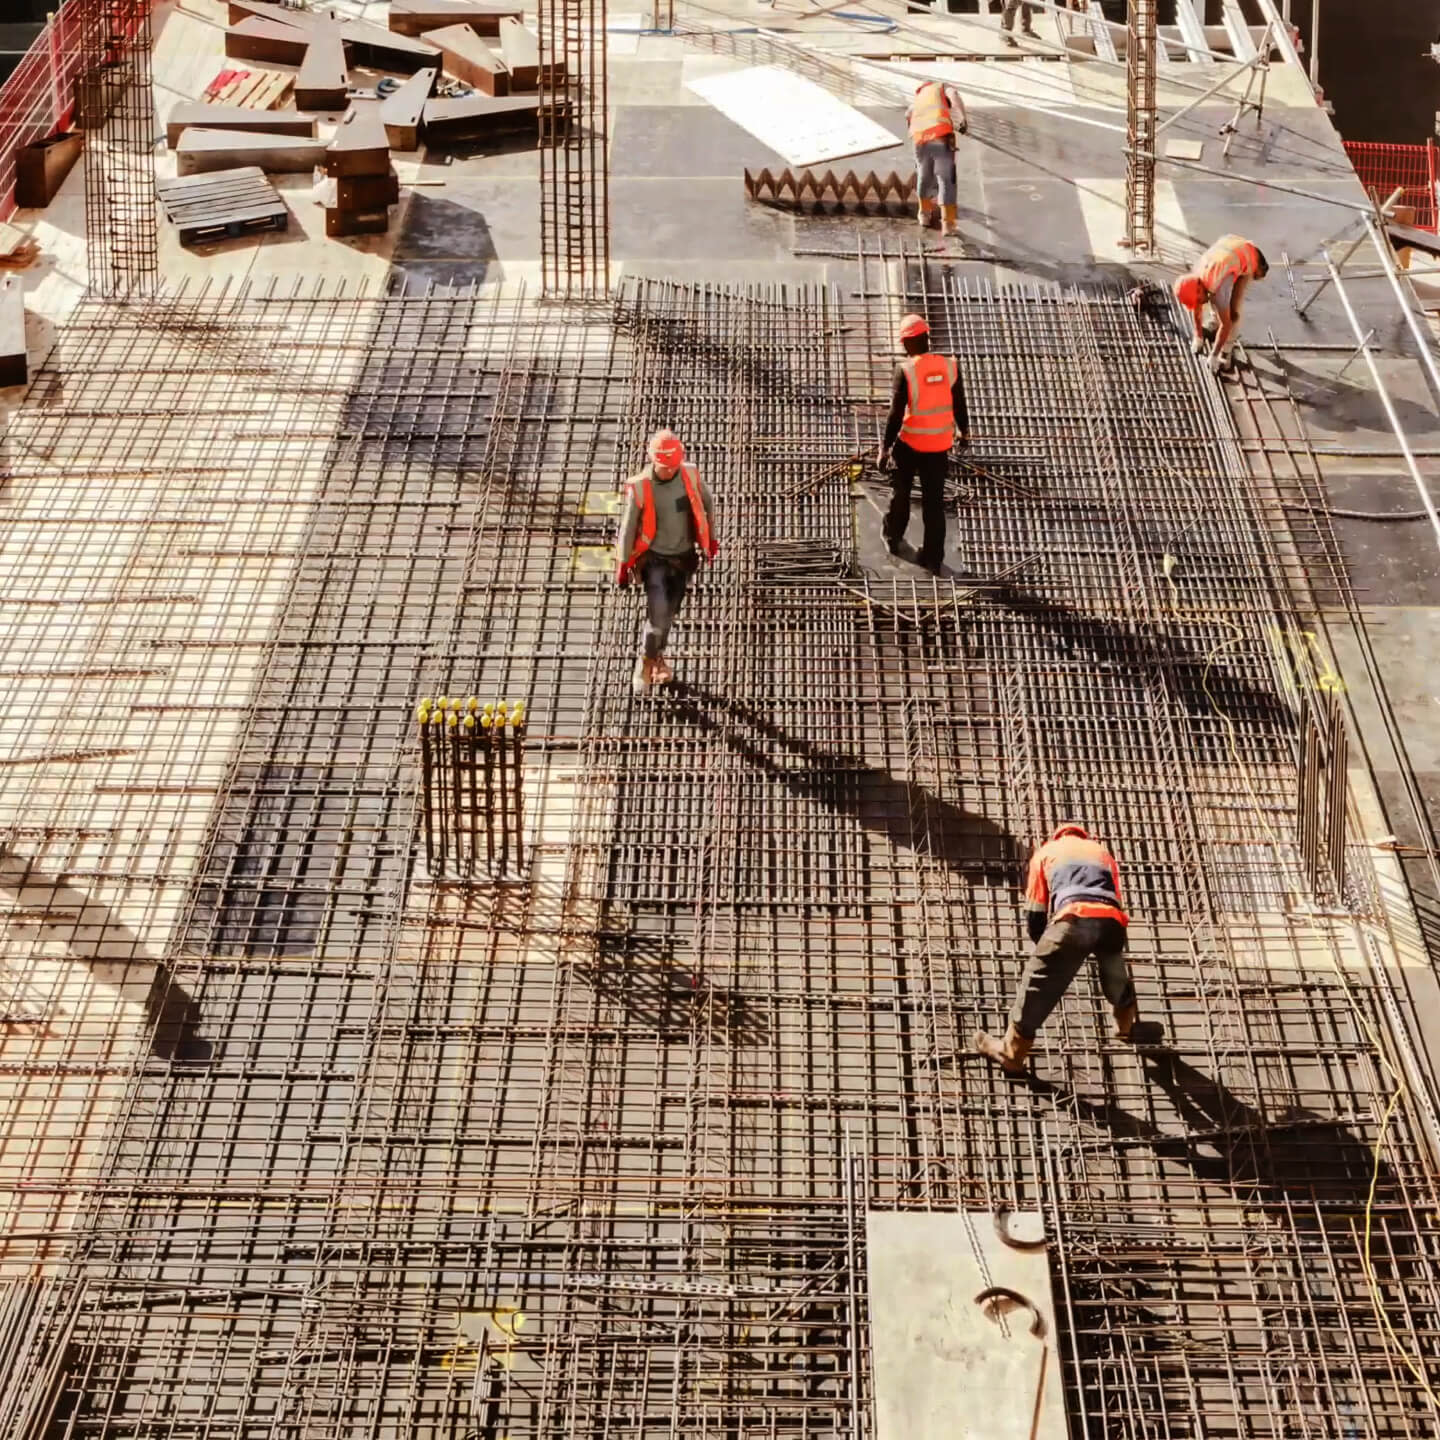 Construction workers finishing up a floor